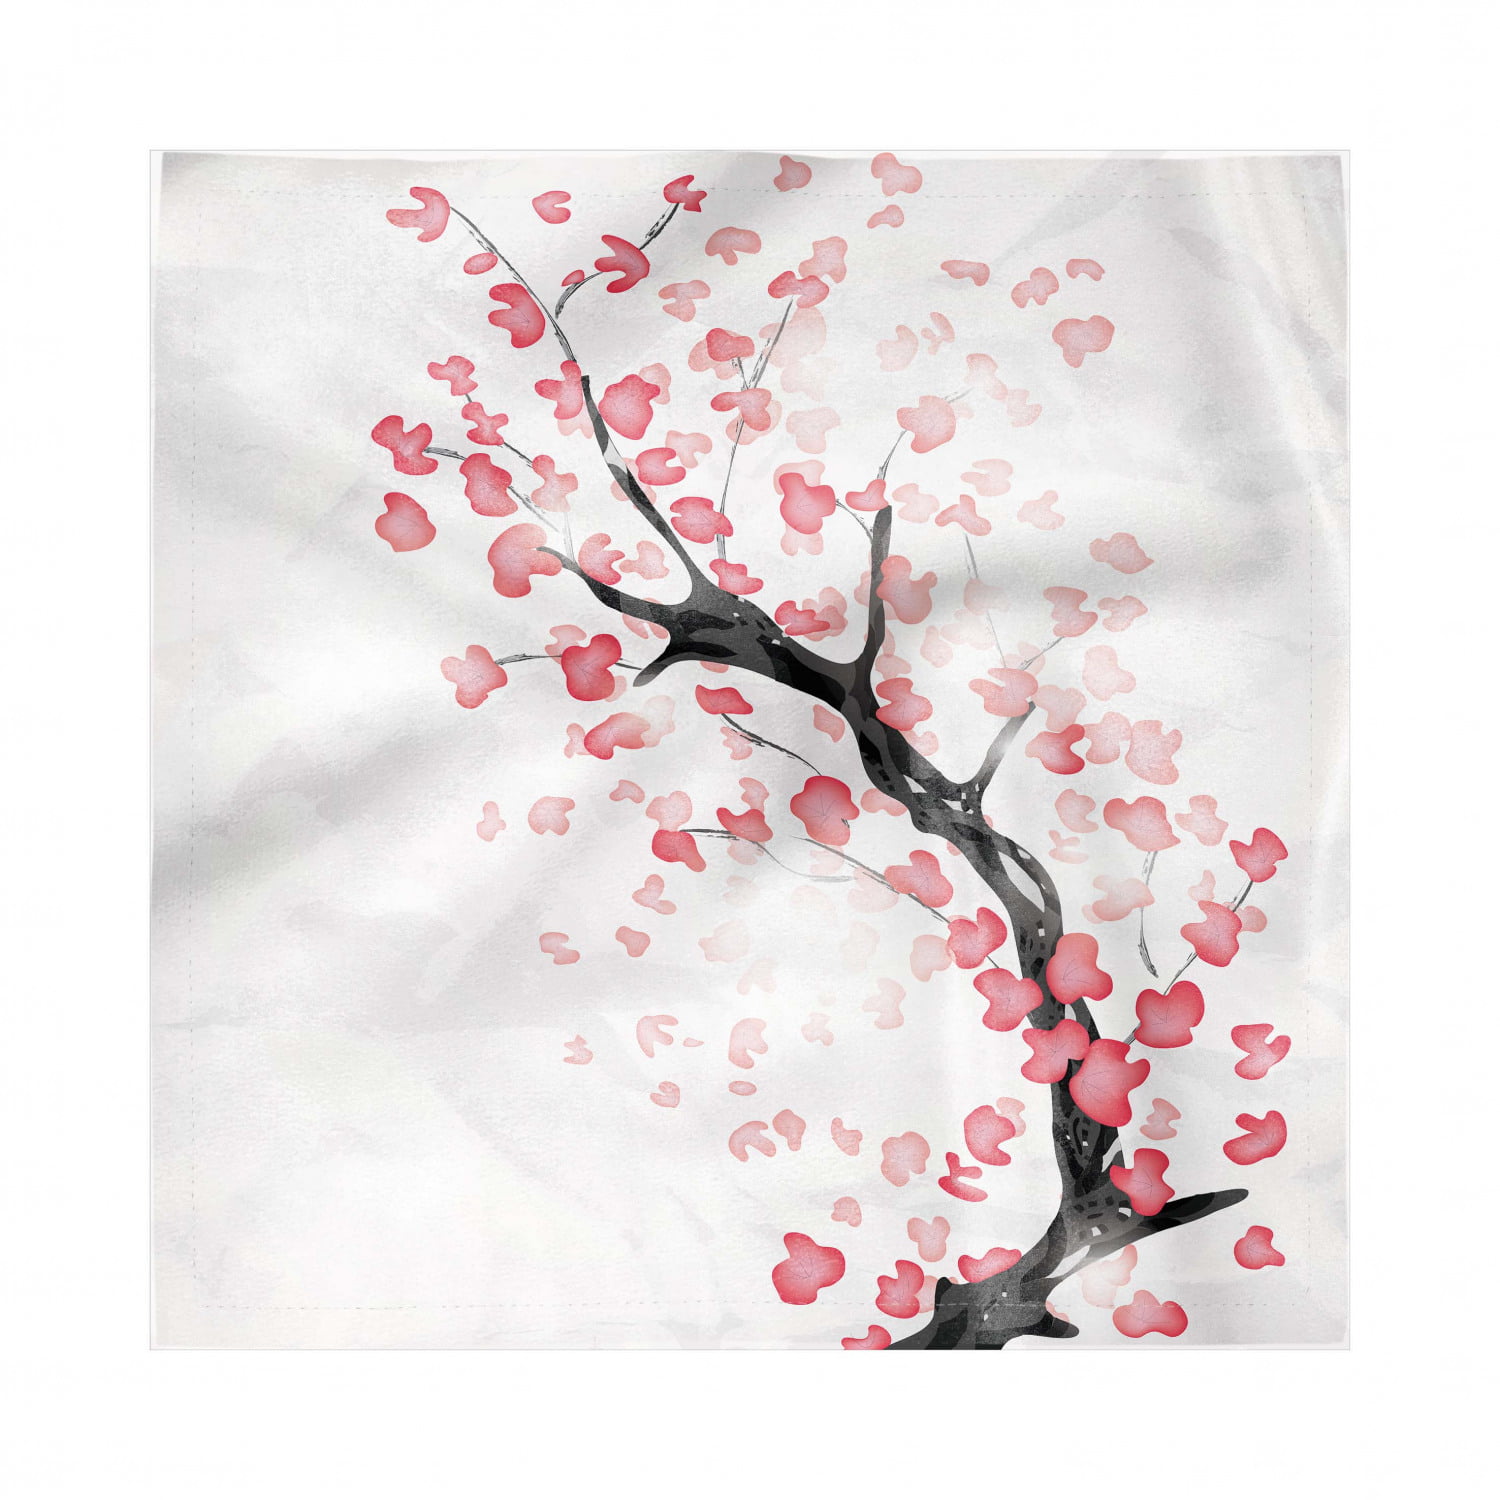 Multicolor Ambesonne Country Place Mats Set of 4 Image Blooming Japanese Cherry Tree Sakura on The Lake Soft Romantic Culture Print Washable Fabric Placemats for Dining Room Kitchen Table Decor